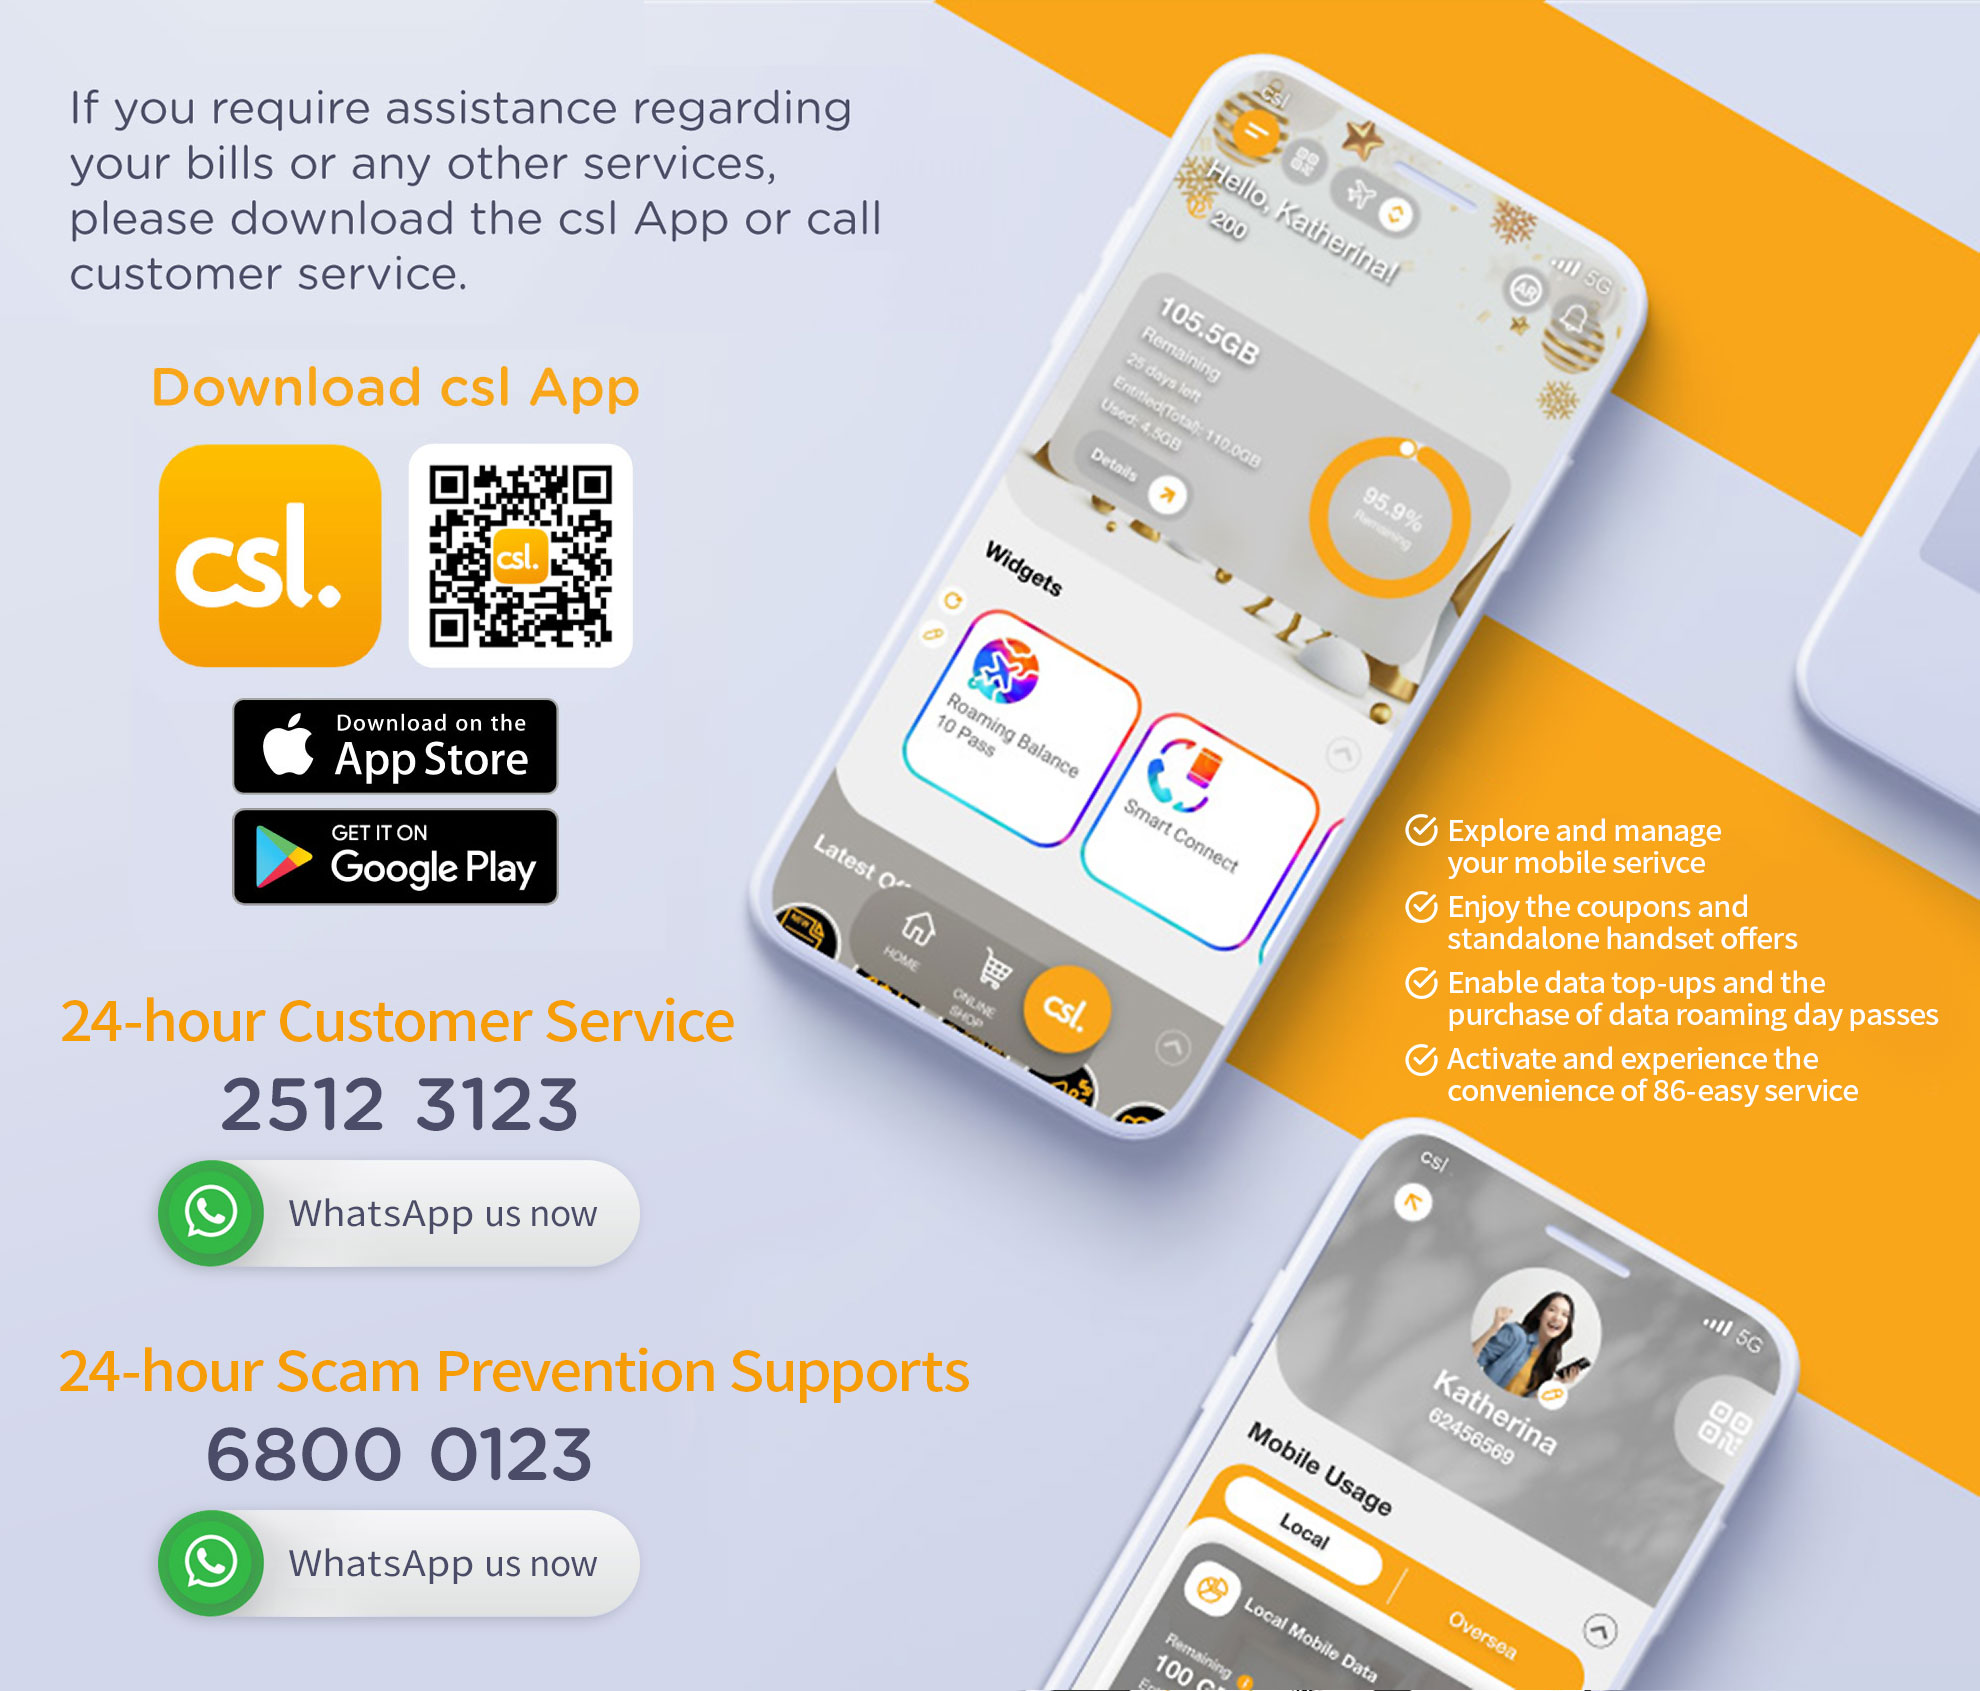 If you require assistance regarding your bills or any other services, please download the csl App or call customer service hotline.